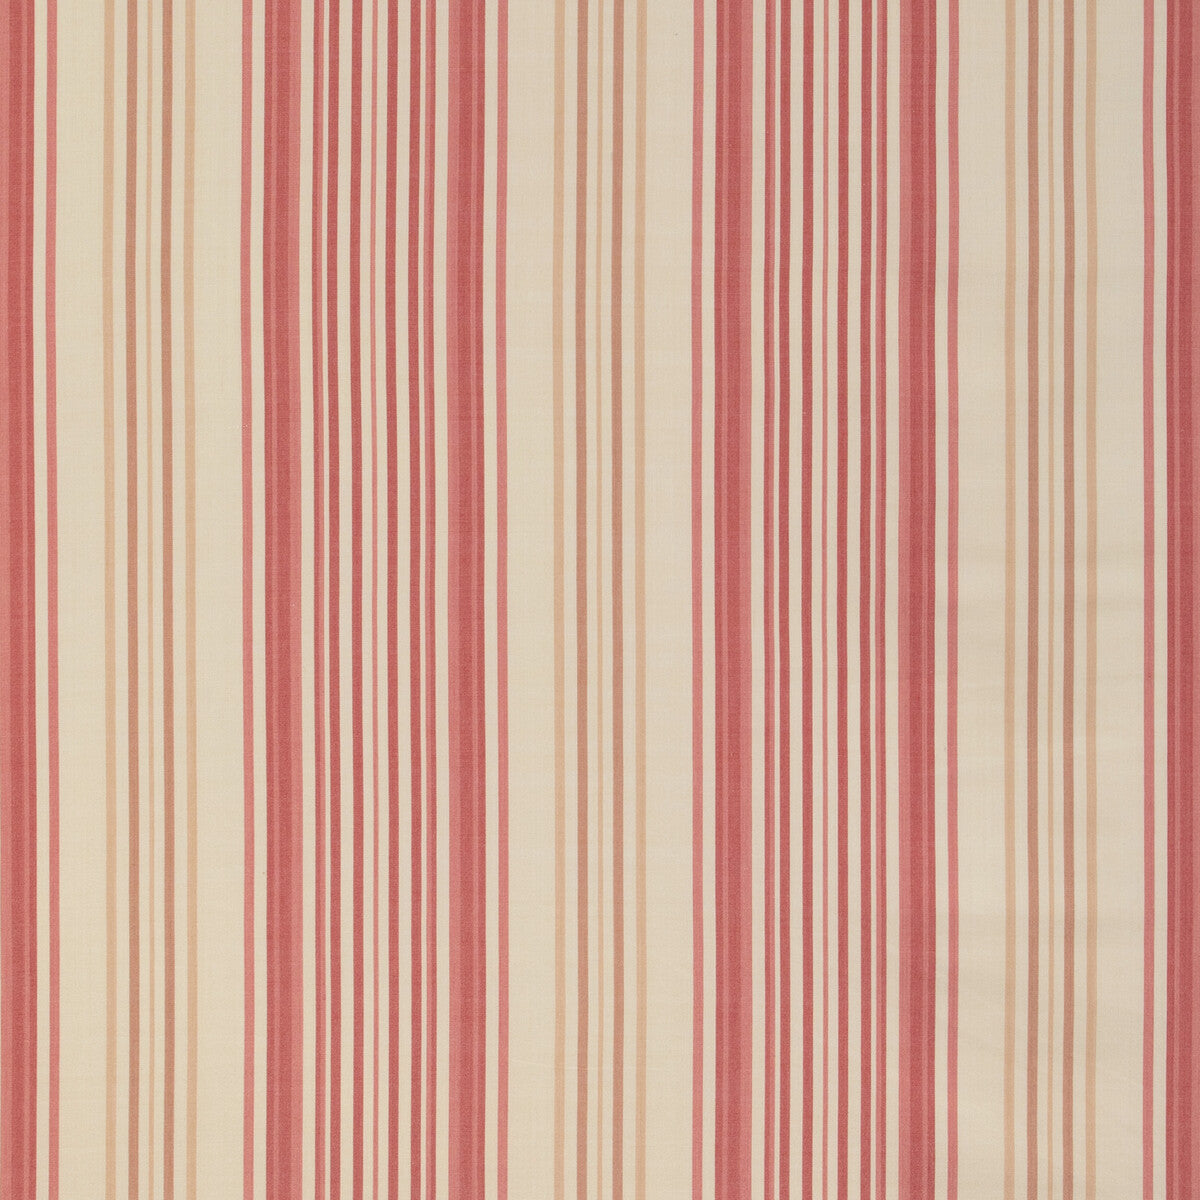 Upland Stripe fabric in rose color - pattern 2023104.916.0 - by Lee Jofa in the Highfield Stripes And Plaids collection